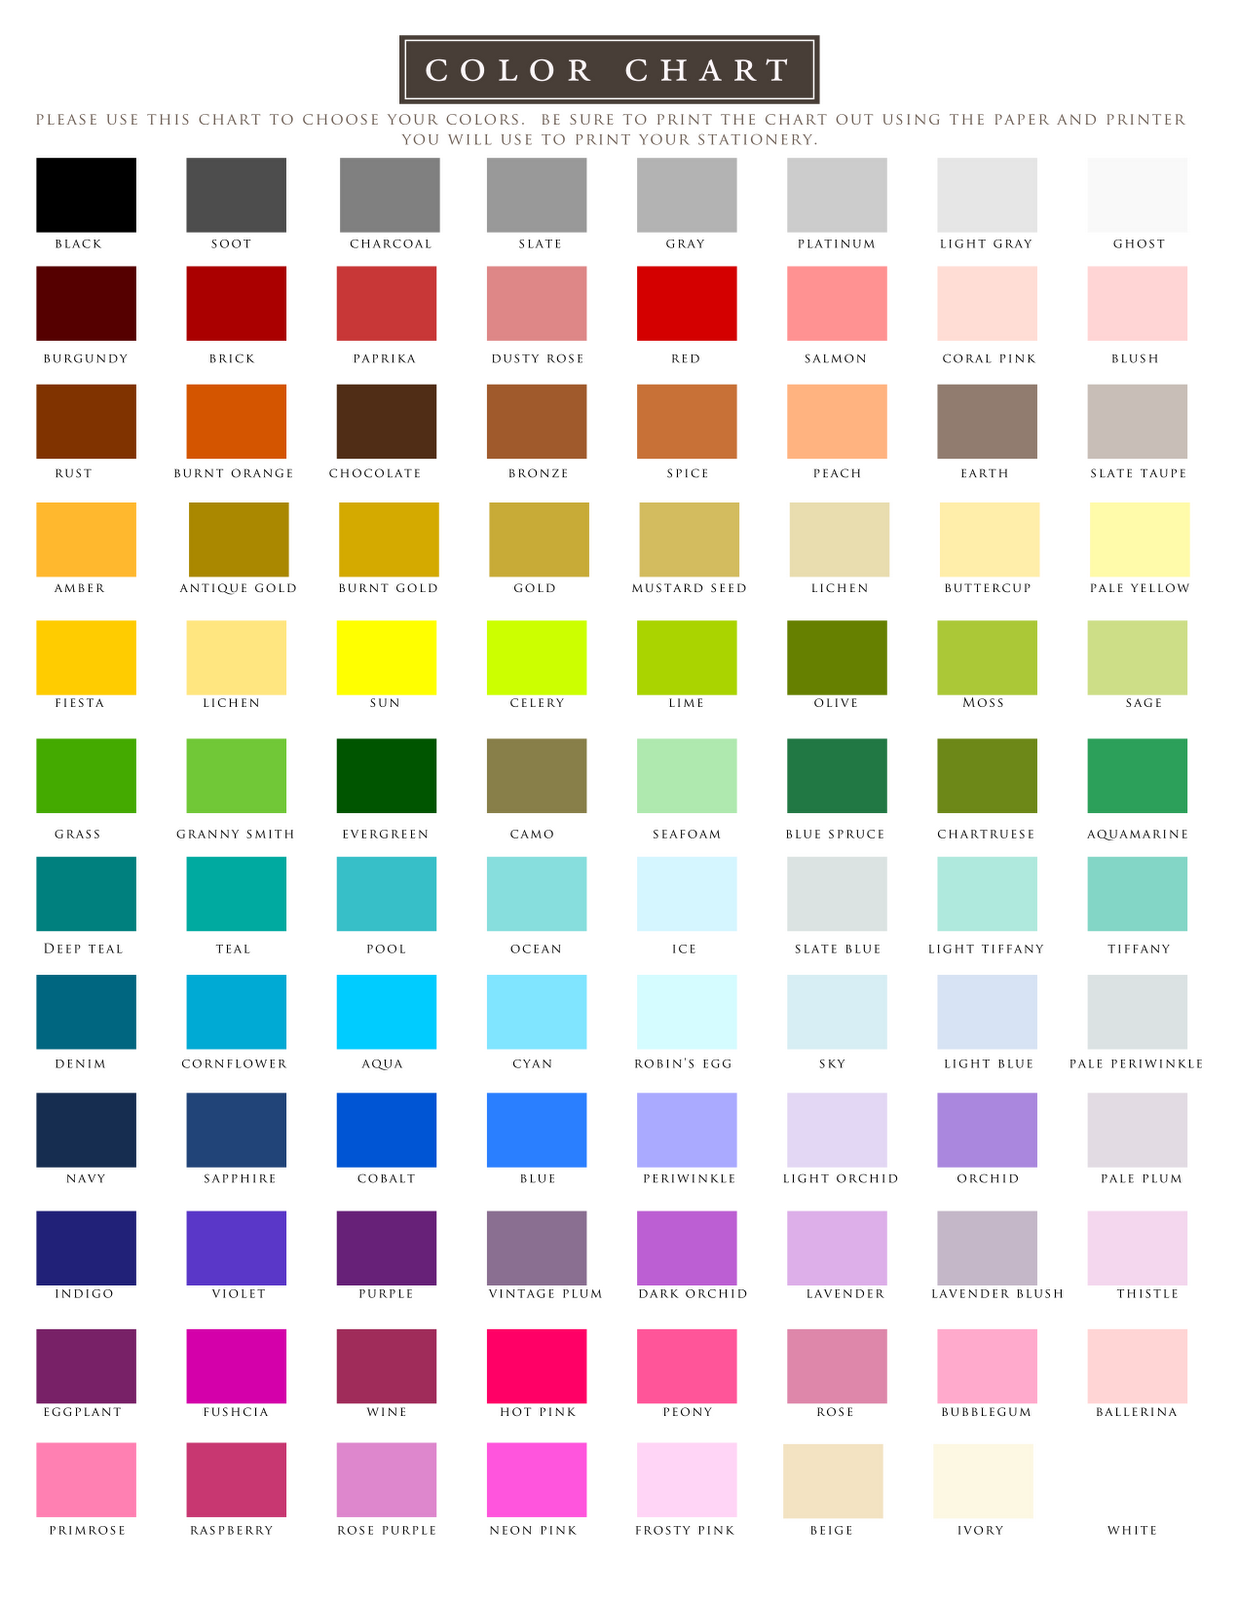 Signatures by Sarah: Color Chart